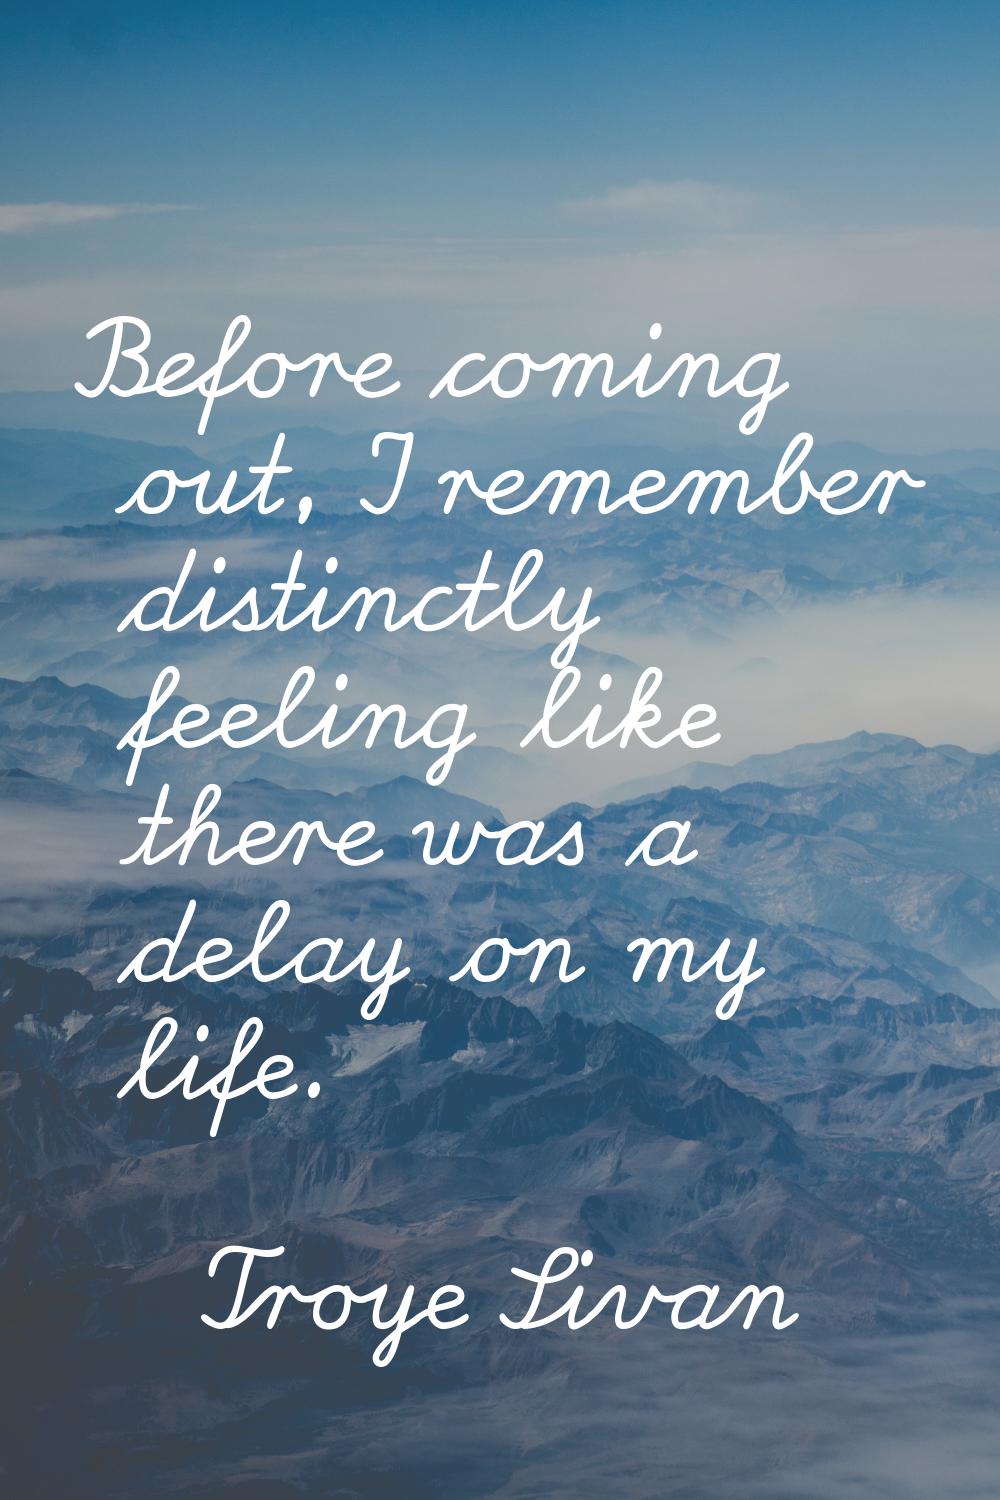 Before coming out, I remember distinctly feeling like there was a delay on my life.